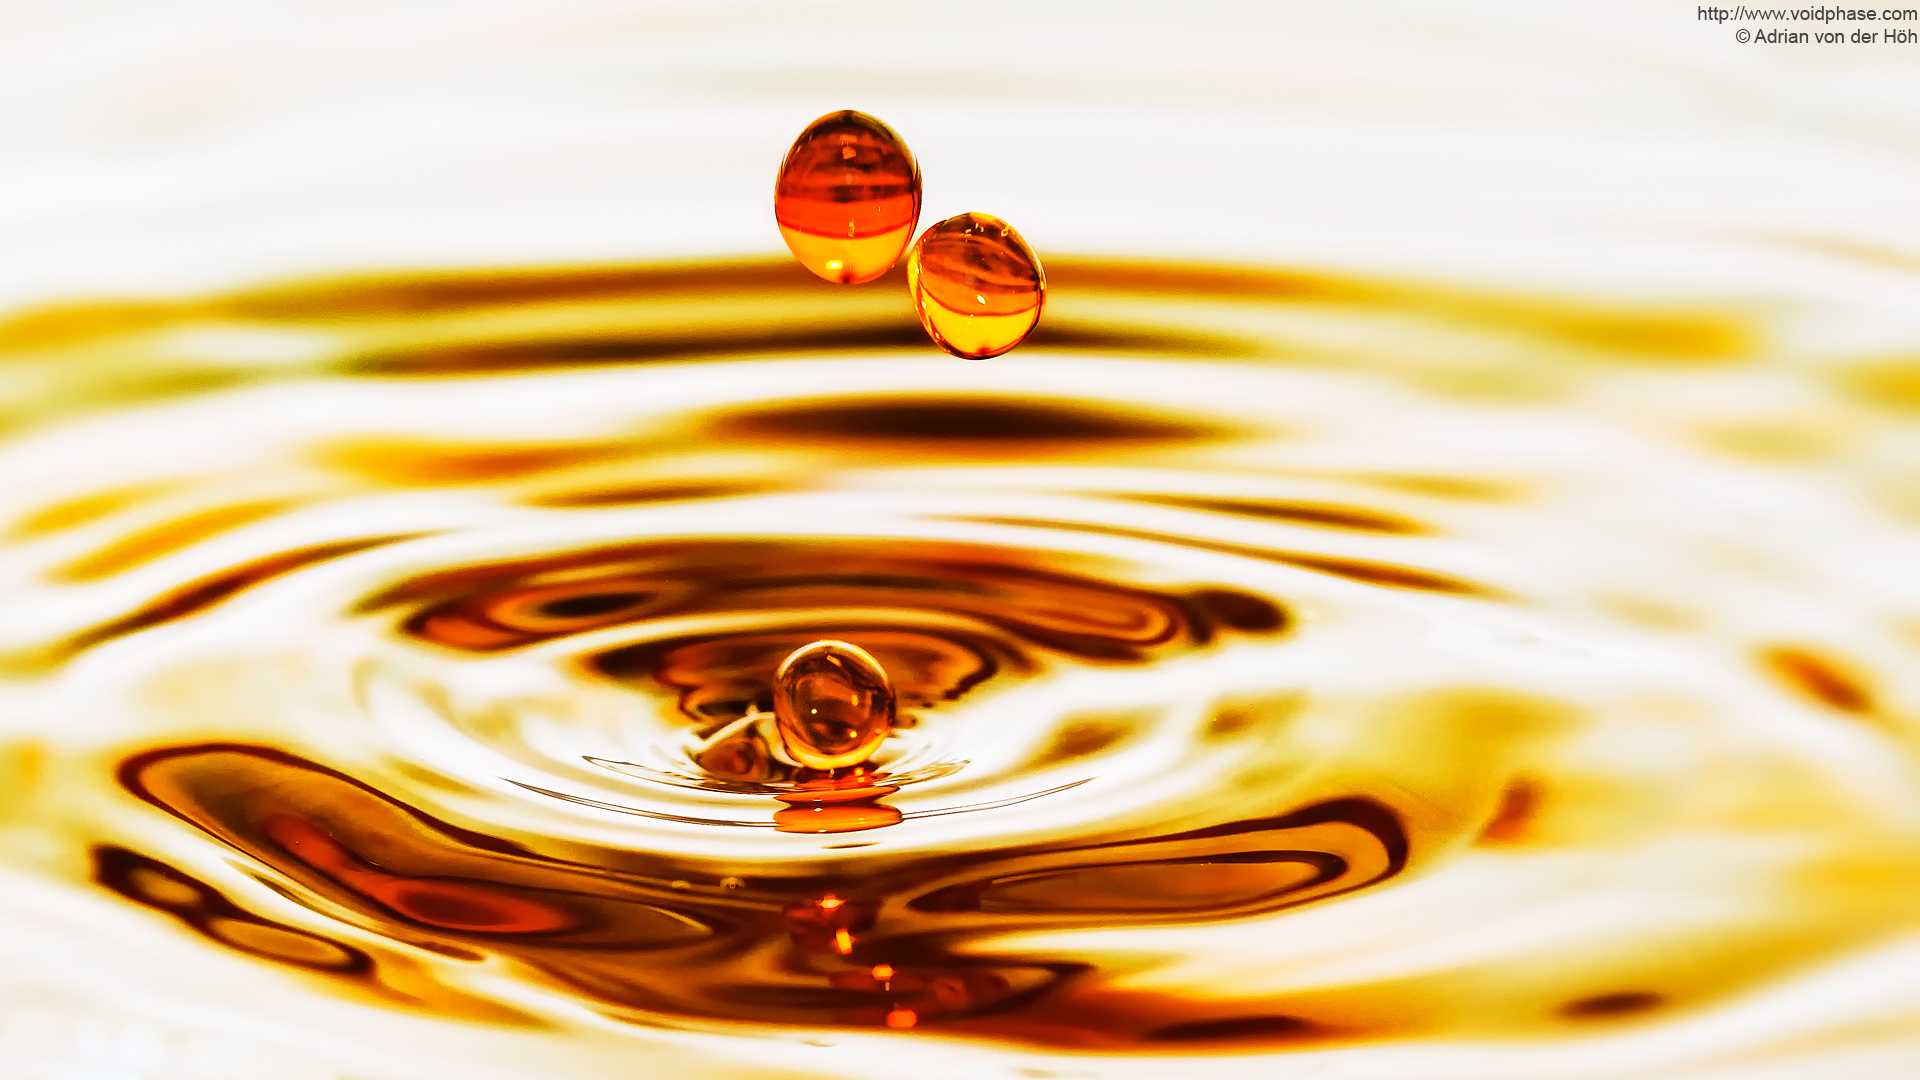 Photo of golden drops of water over a liquid surface | Voidphase ...